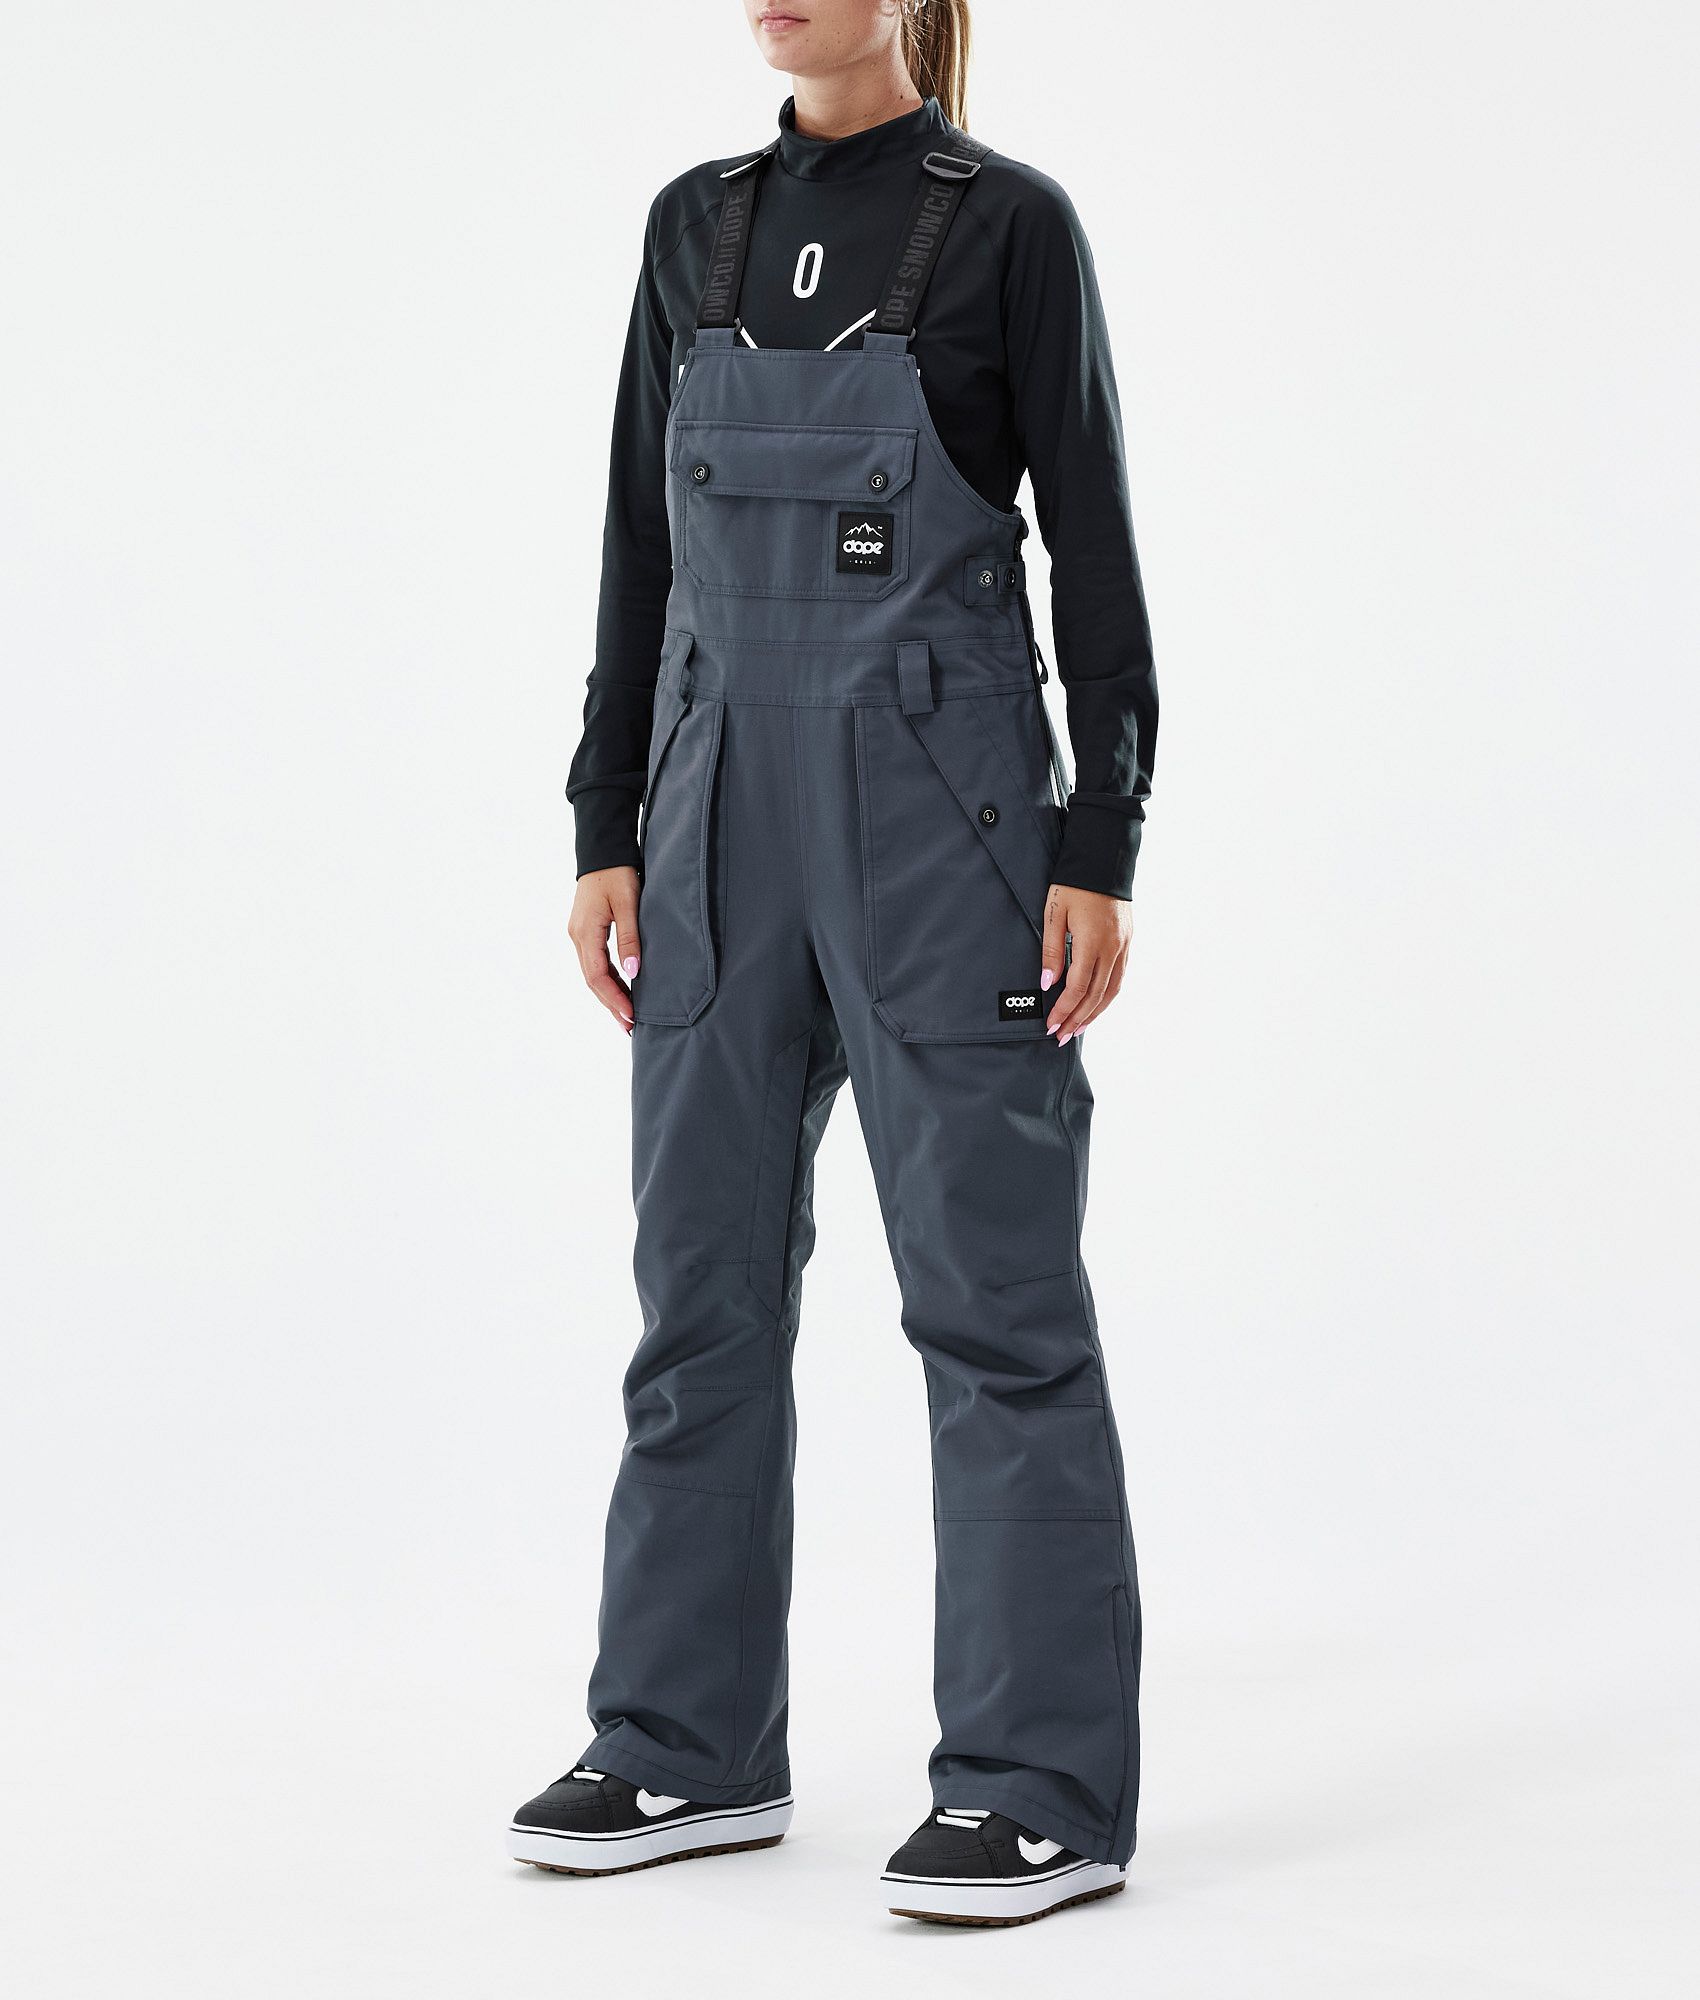 Pants Clearance Women'S Insulated Bib Overalls Solid Color Pocket Trousers Snow  Pants Black S - Walmart.com